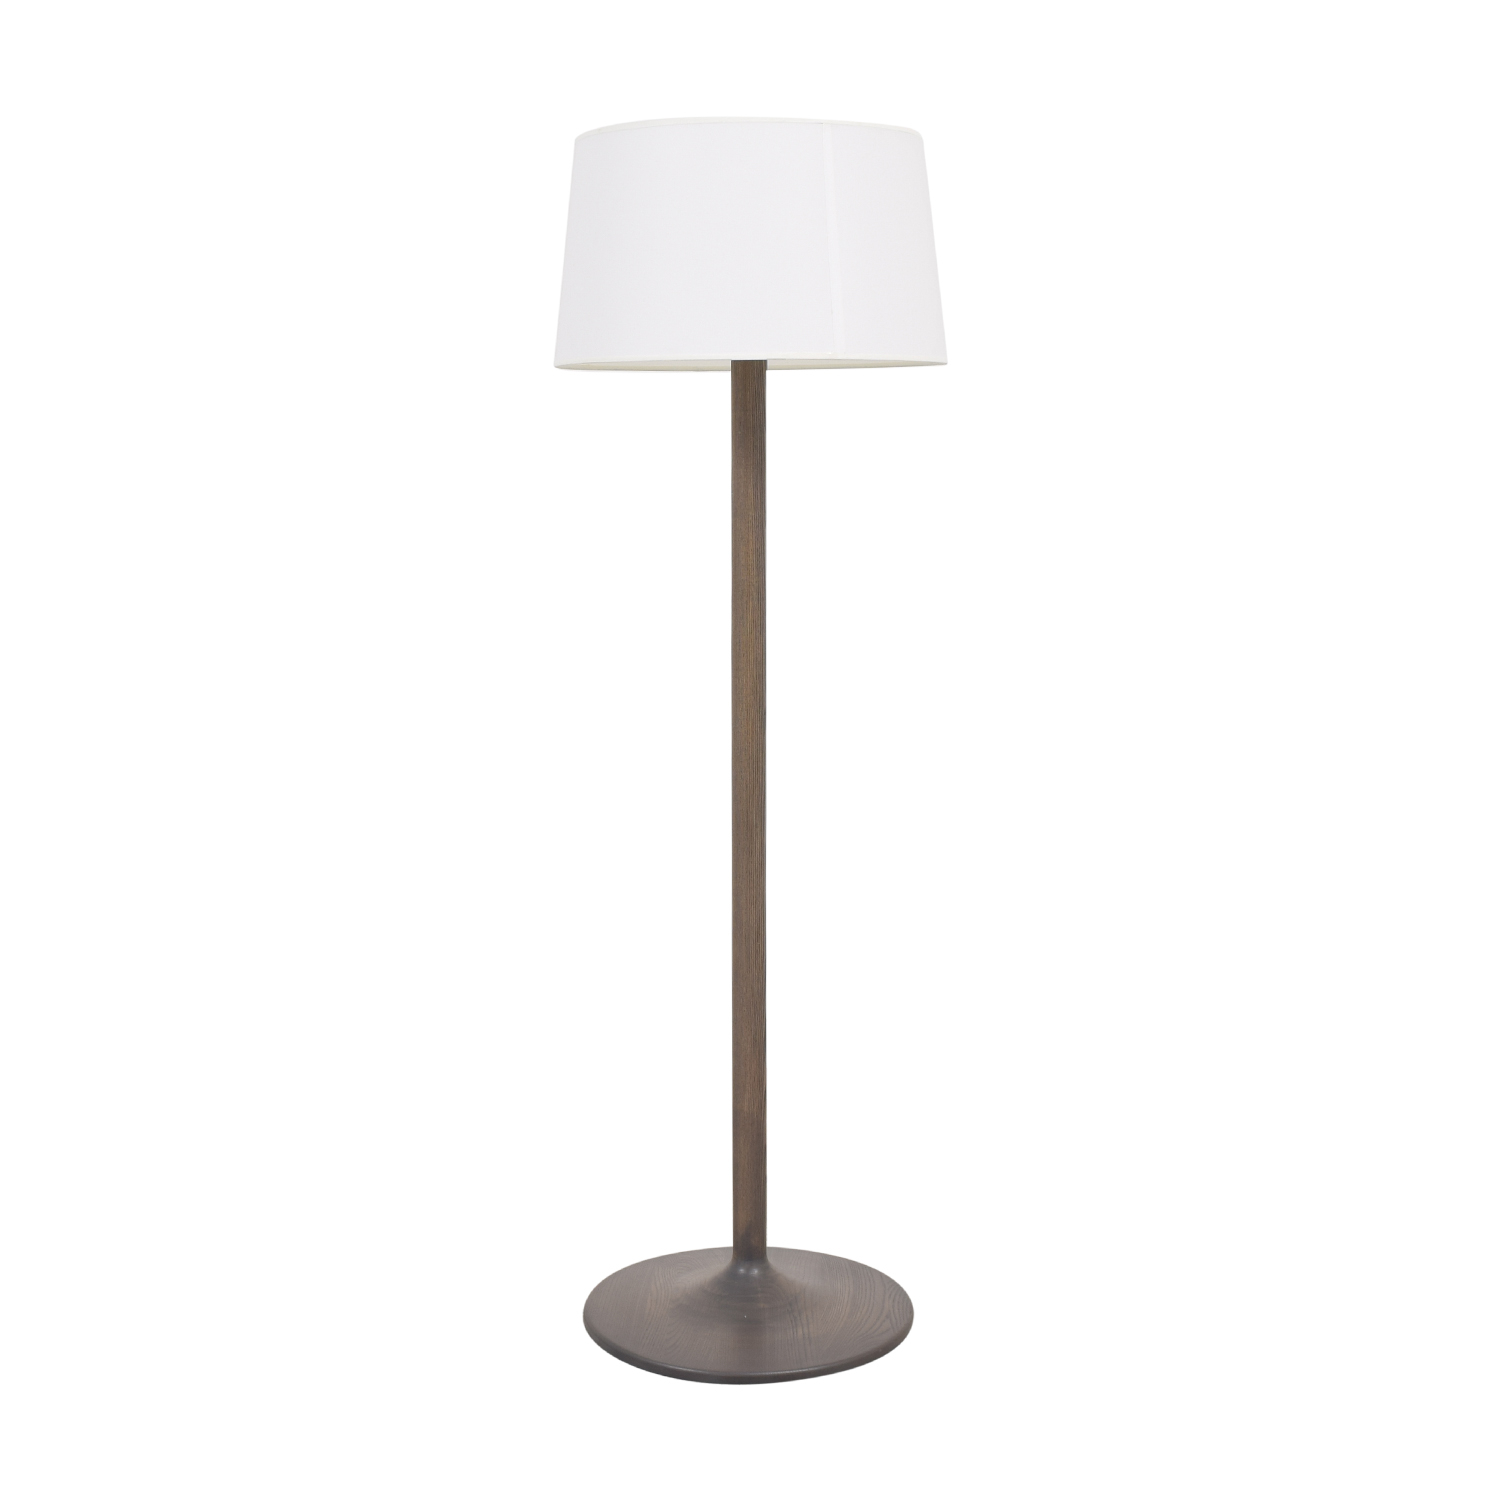 20 Off Room Board Room Board Solid Wood Floor Lamp Decor intended for measurements 1500 X 1500